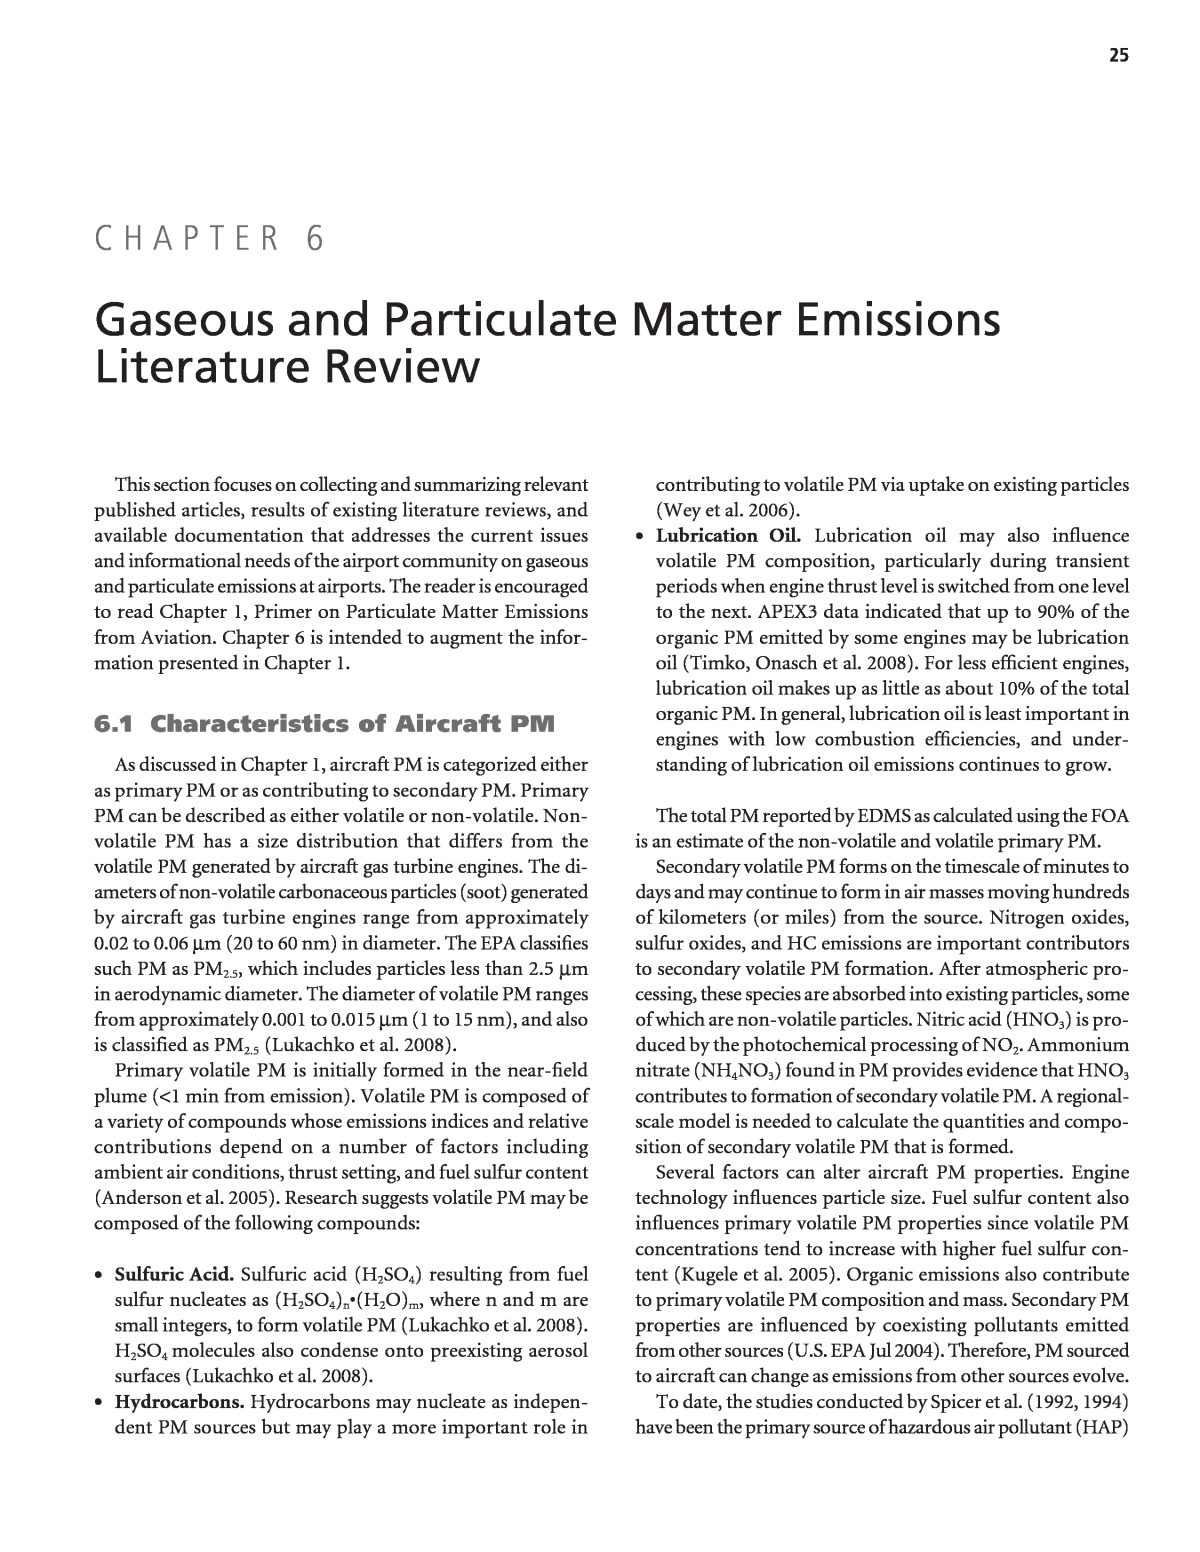 review of existing literature